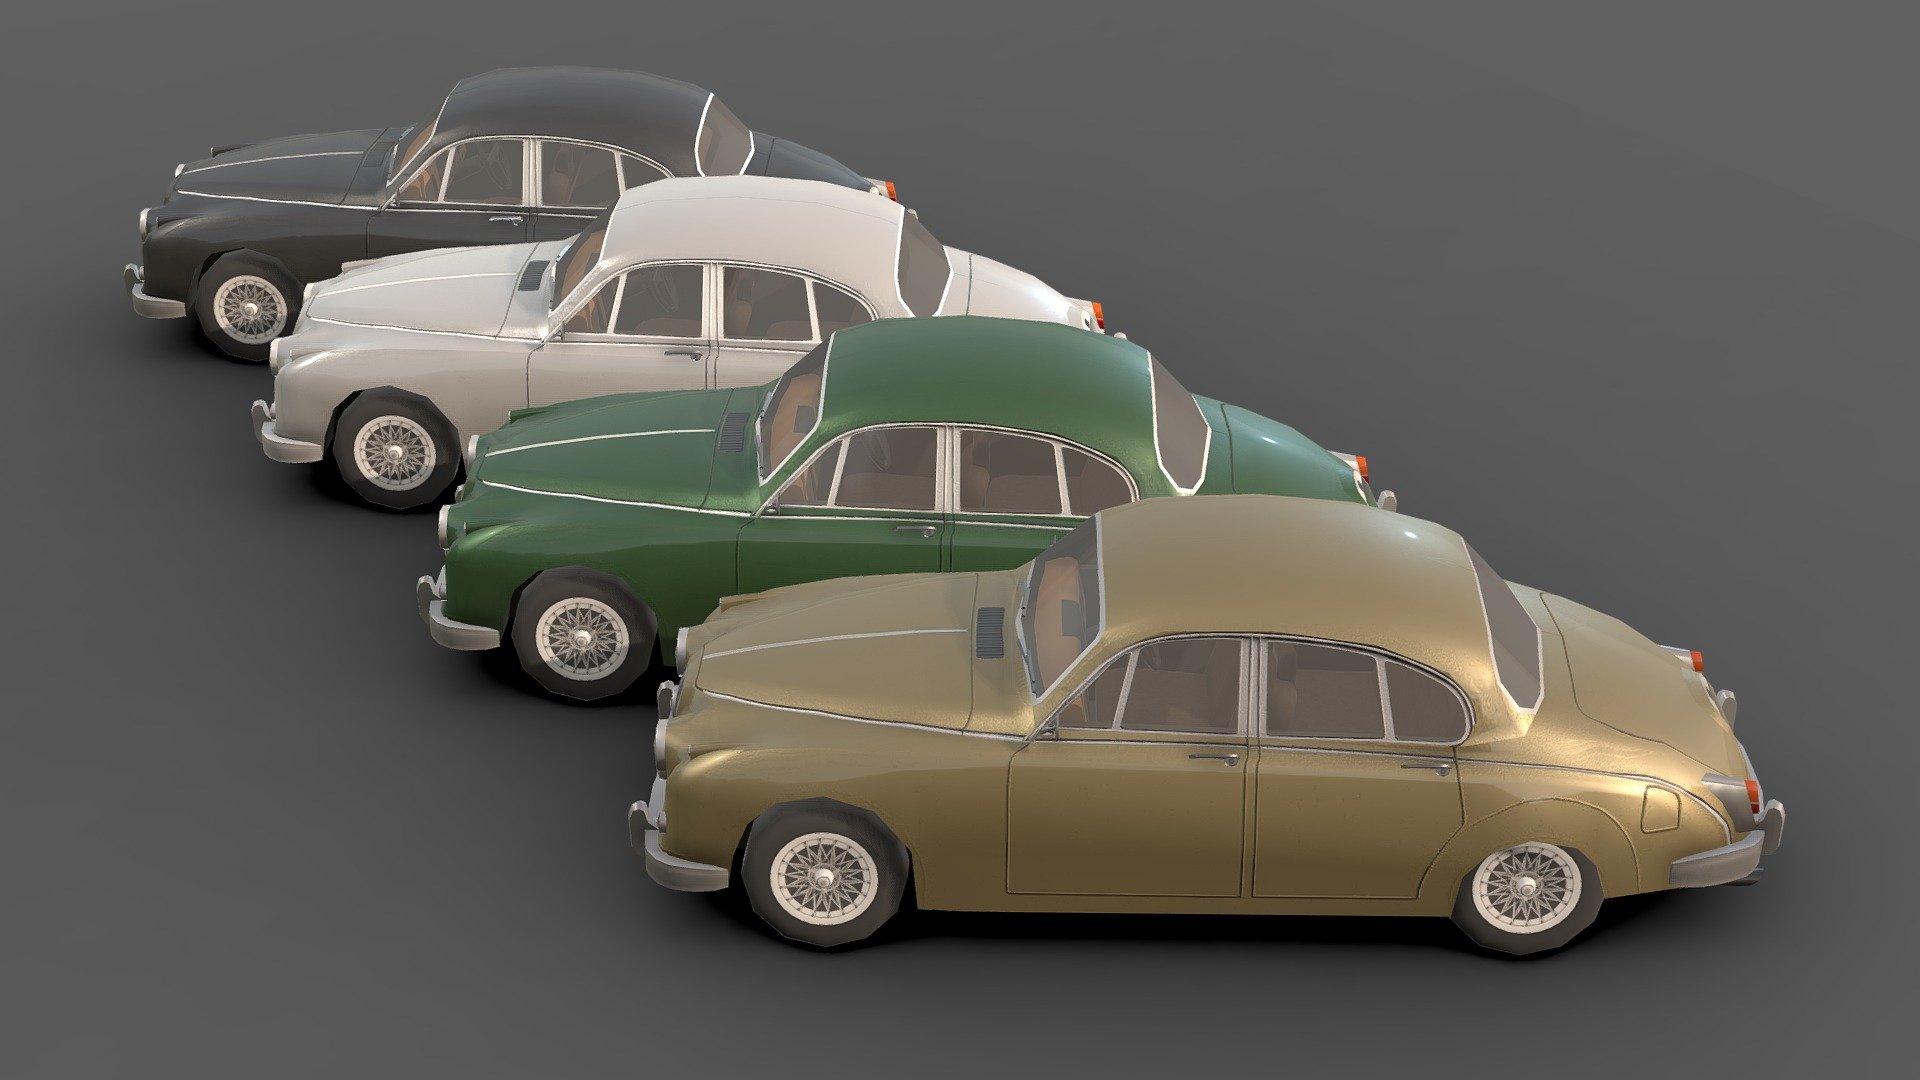 Classic Car # 1 .

You can use these models in any game and project.

This model is made with order and precision.

Separated parts (bodys . wheels . Steer ).

This car has 5 different colors.

Very Low- Poly.

The interior of this car is very low poly.

Average poly count: 5,000 tris.

Texture size: 2048 / 1024 / 512  (PNG).

It has a UV map texture.

Number of textures: 3.

Number of materials: 4.

Format: Fbx / Obj / 3DMax .

The original files are in the Additional file .

Wait for my new models.. Your friend (Sidra) 3d model